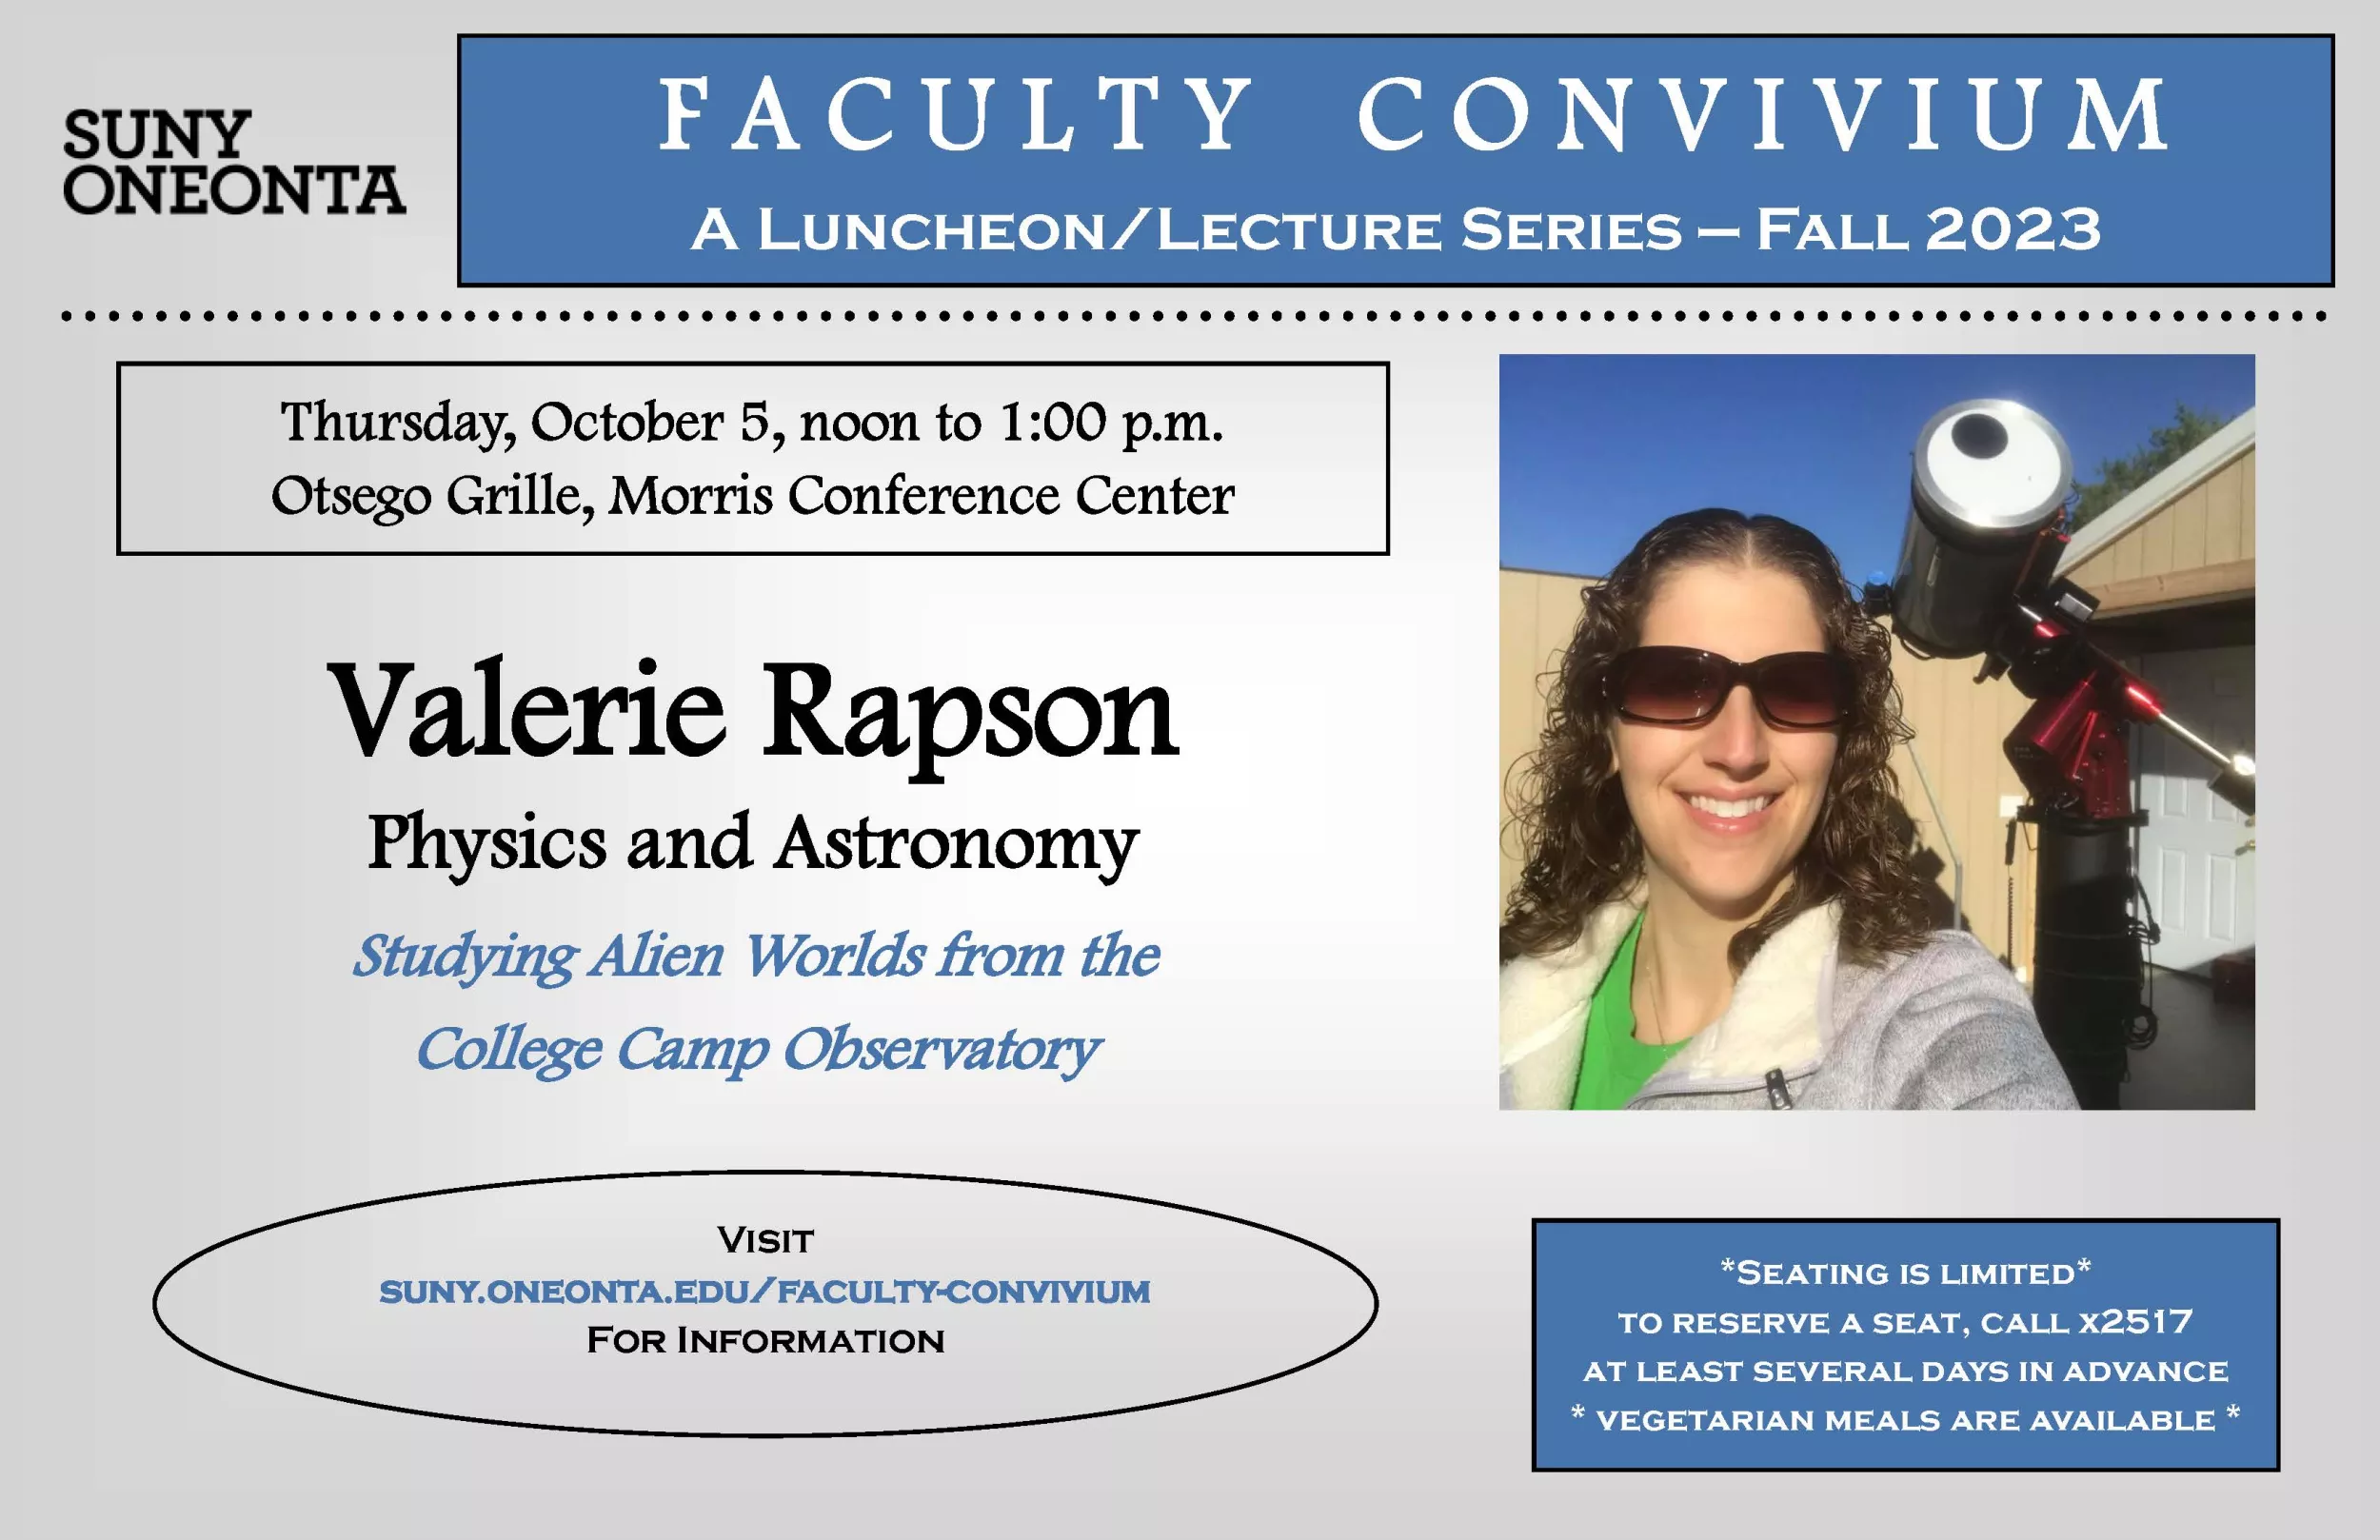 Thursday, October 5, noon to 1:00 p.m. Otsego Grille, Morris Conference Center Valerie Rapson Physics and Astronomy Studying Alien Worlds from the College Camp Observatory